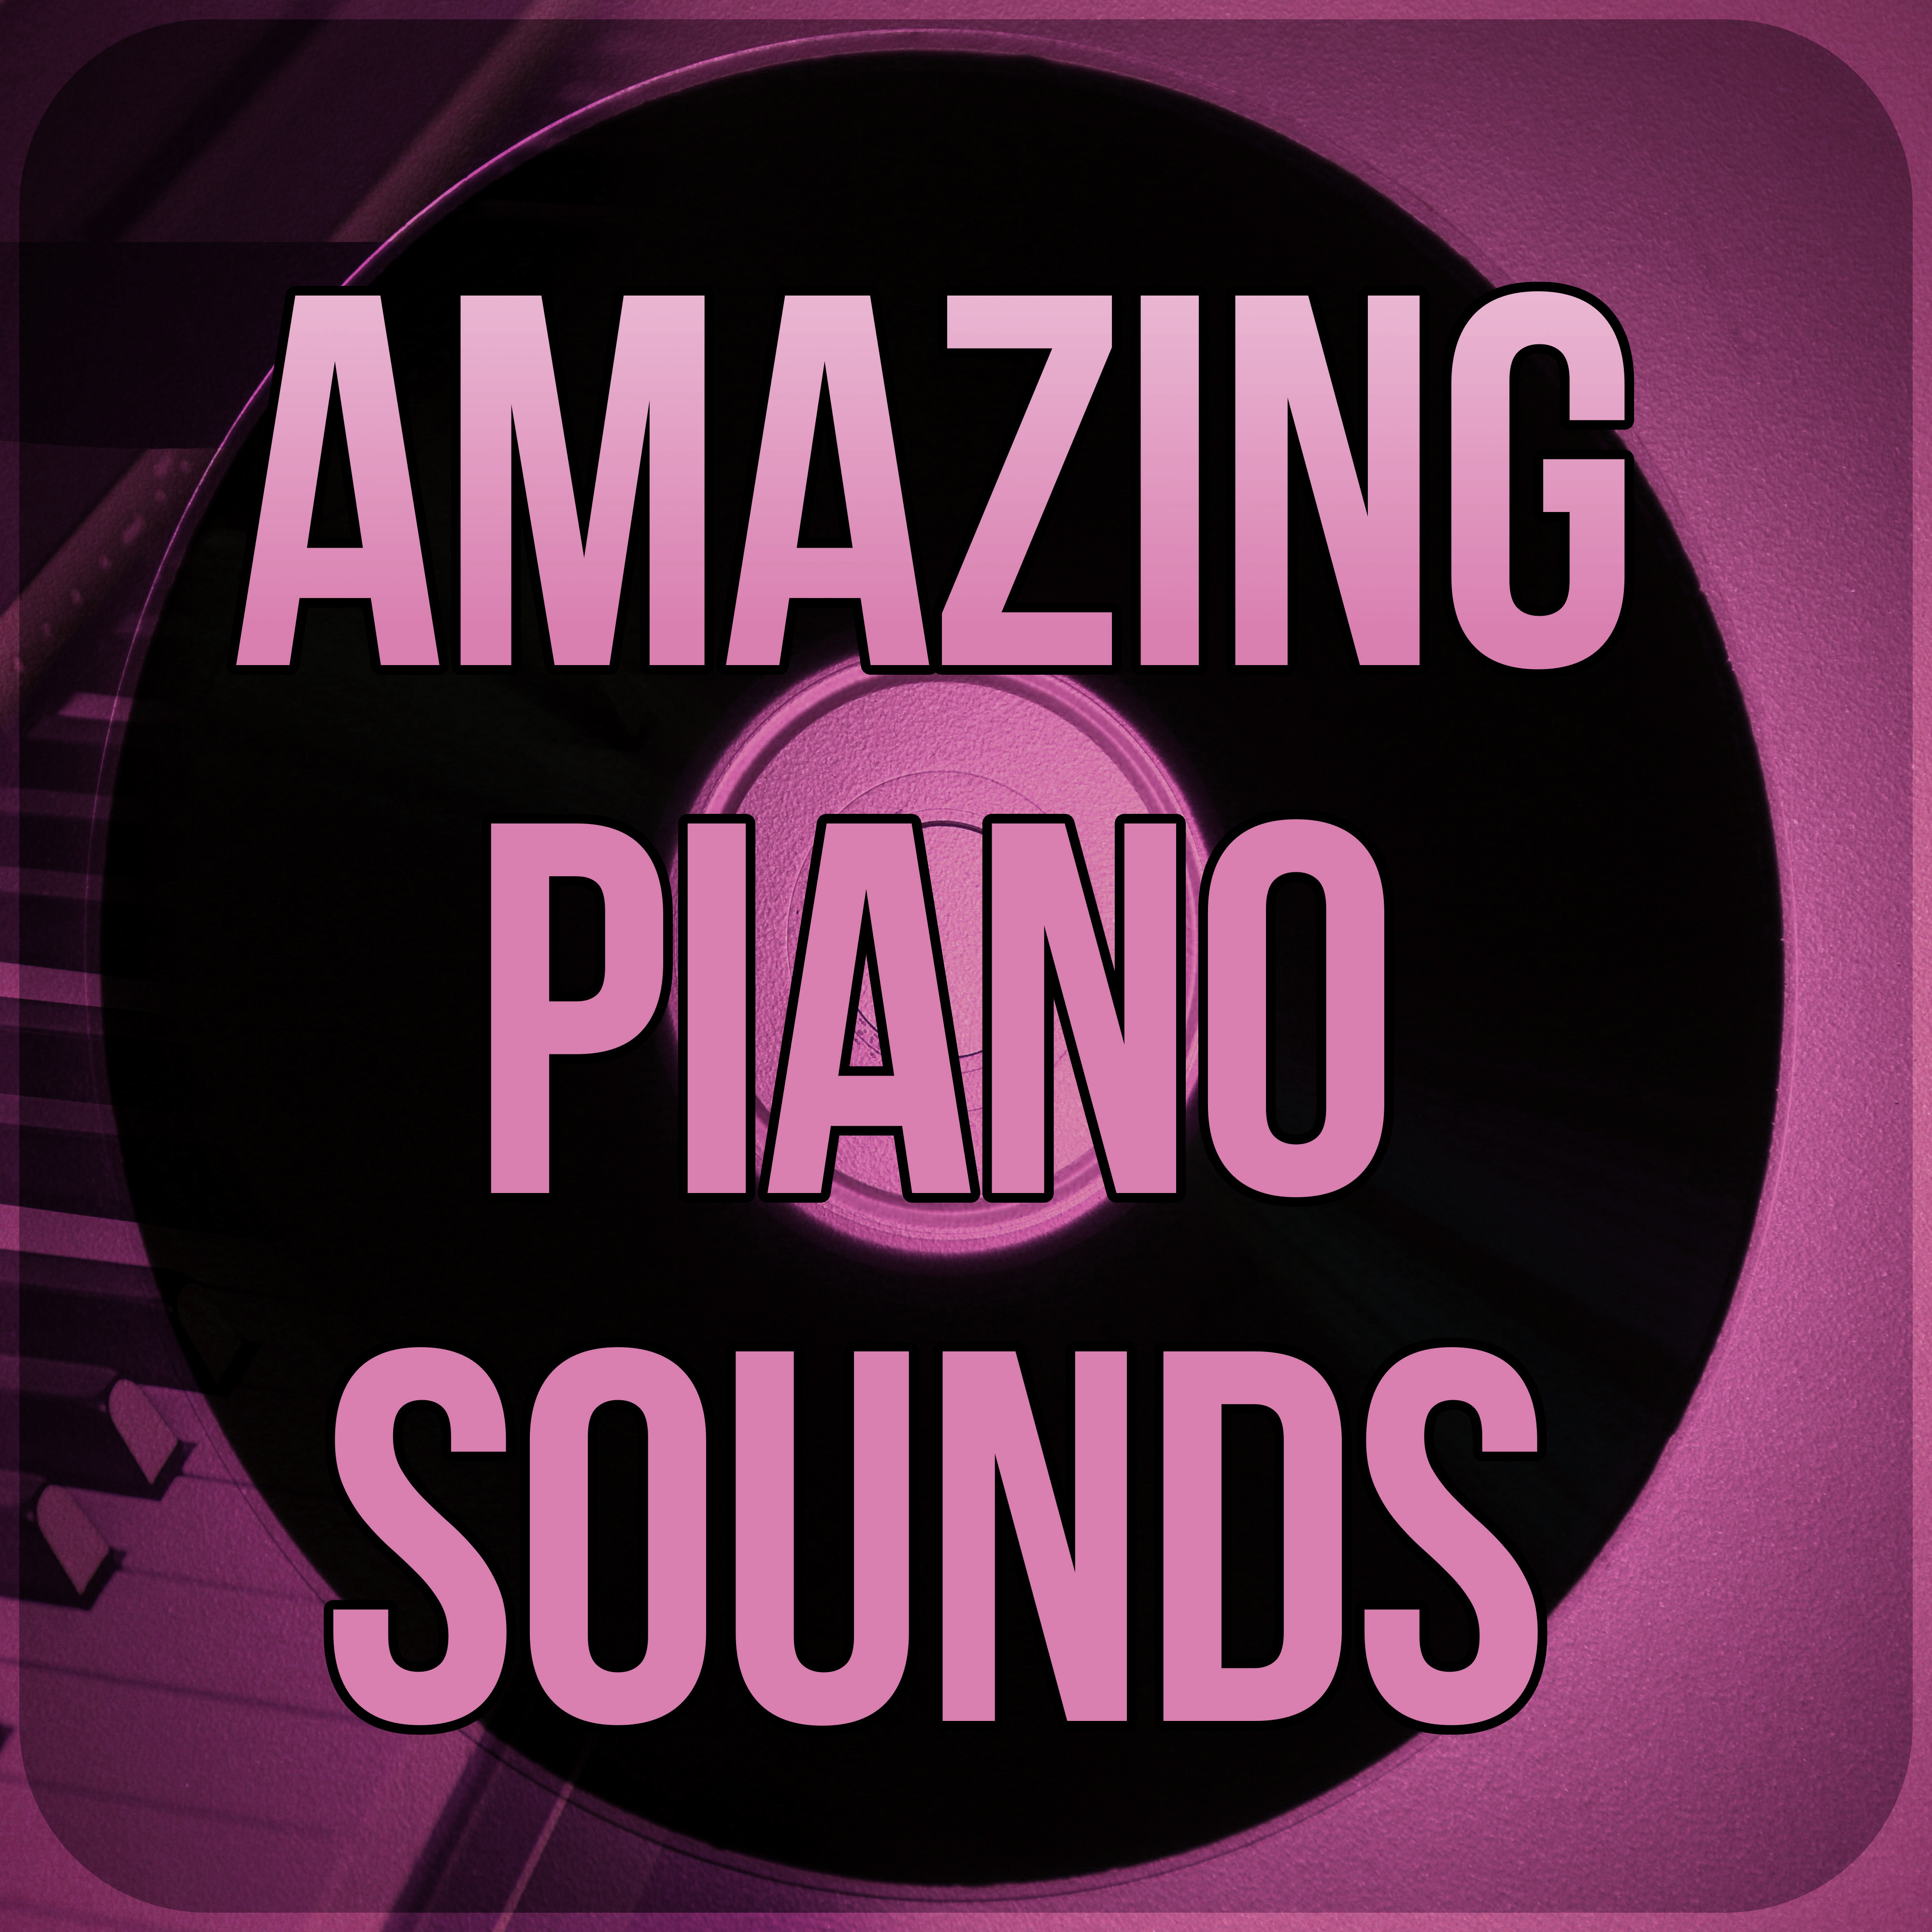 Amazing Piano Sounds - Wellness Music Spa, Music and Pure Nature Sounds for Stress Relief, Slow Music for Yoga, Relaxing and Meditation